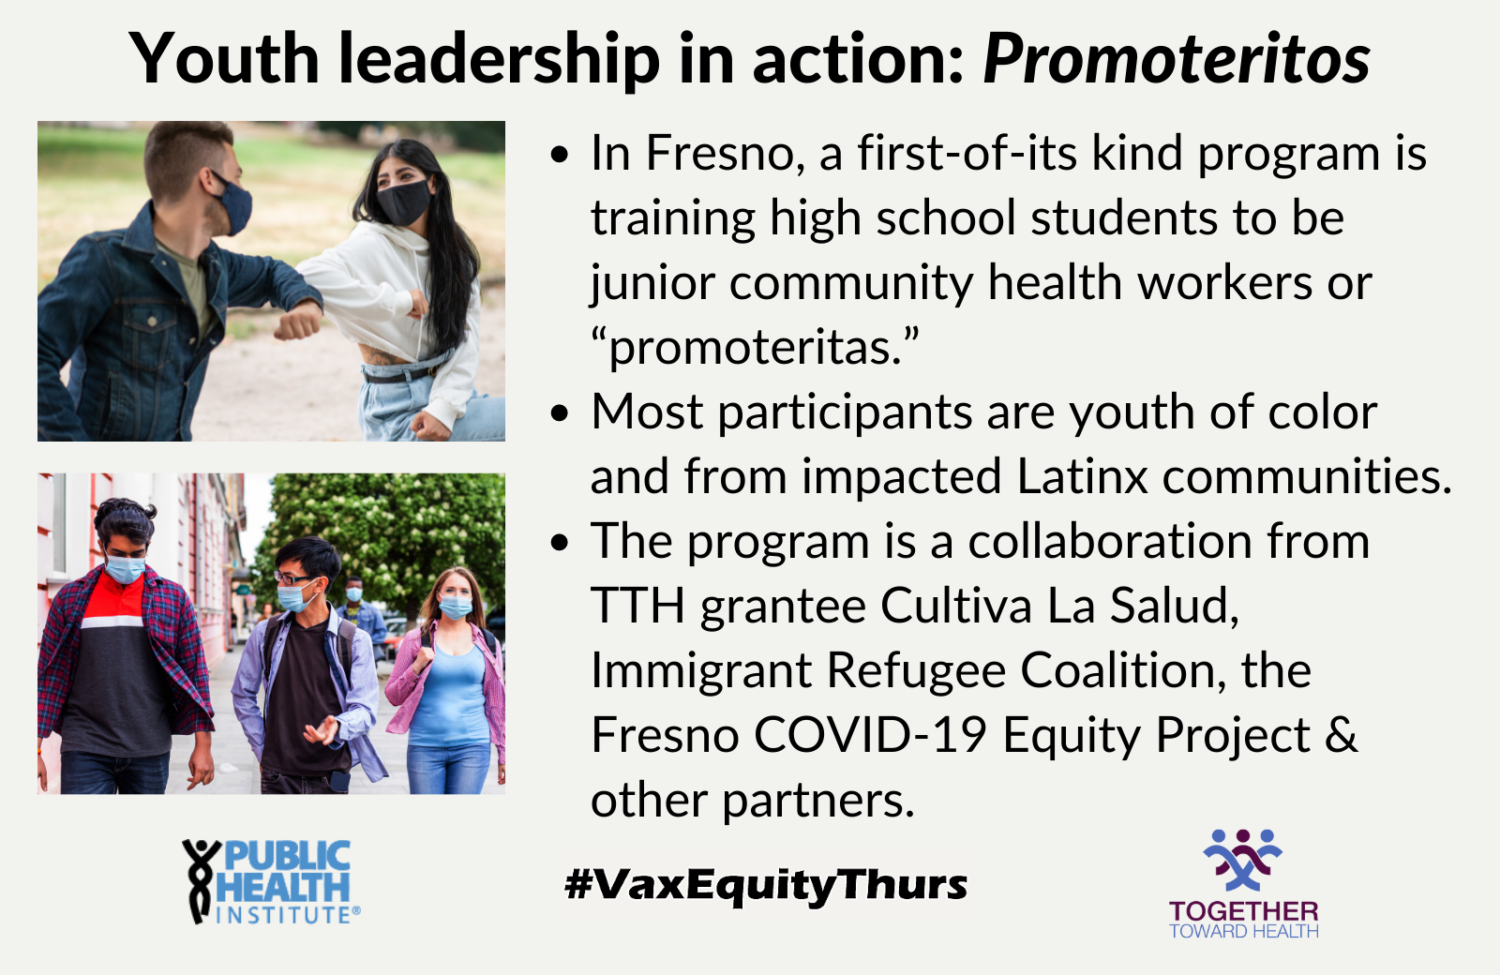 Youth leadership in action: In Fresno, a first-of-its kind program is training high school students to be junior community health workers or “promoteritas.” Most participants are youth of color and from impacted Latinx communities. The program is a collaboration from TTH grantee Cultiva La Salud, Immigrant Refugee Coalition, the Fresno COVID-19 Equity Project & other partners.